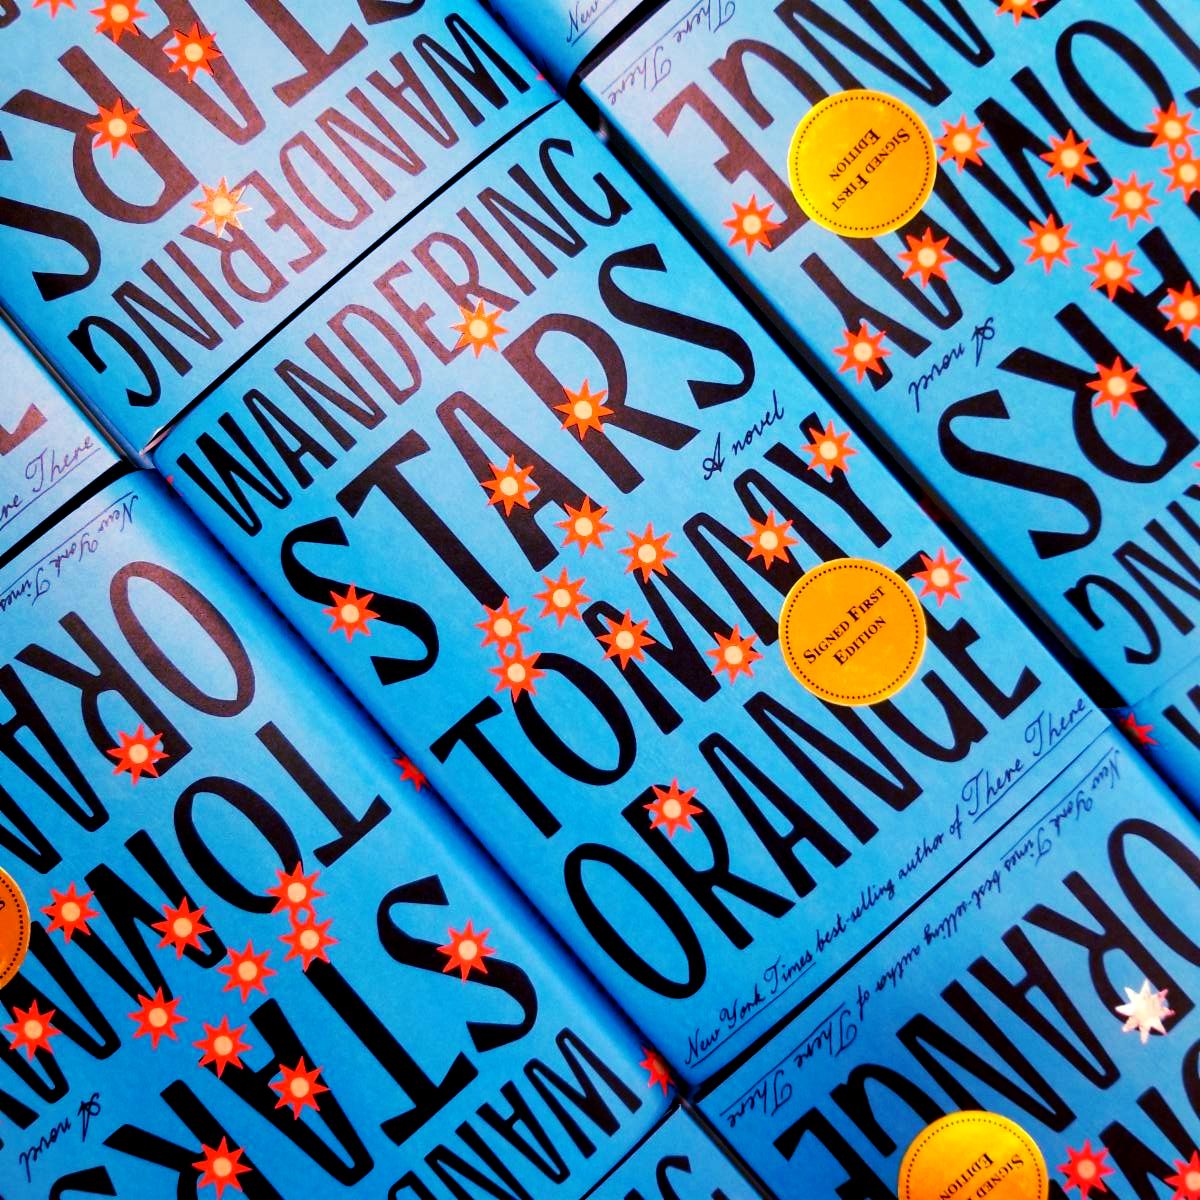 Release day is here for Tommy Orange's 'Wandering Stars,' follow-up to his lauded debut 'There There' -- we have SIGNED first-edition copies while supplies last: nextchapterbooksellers.com/book/978059331…